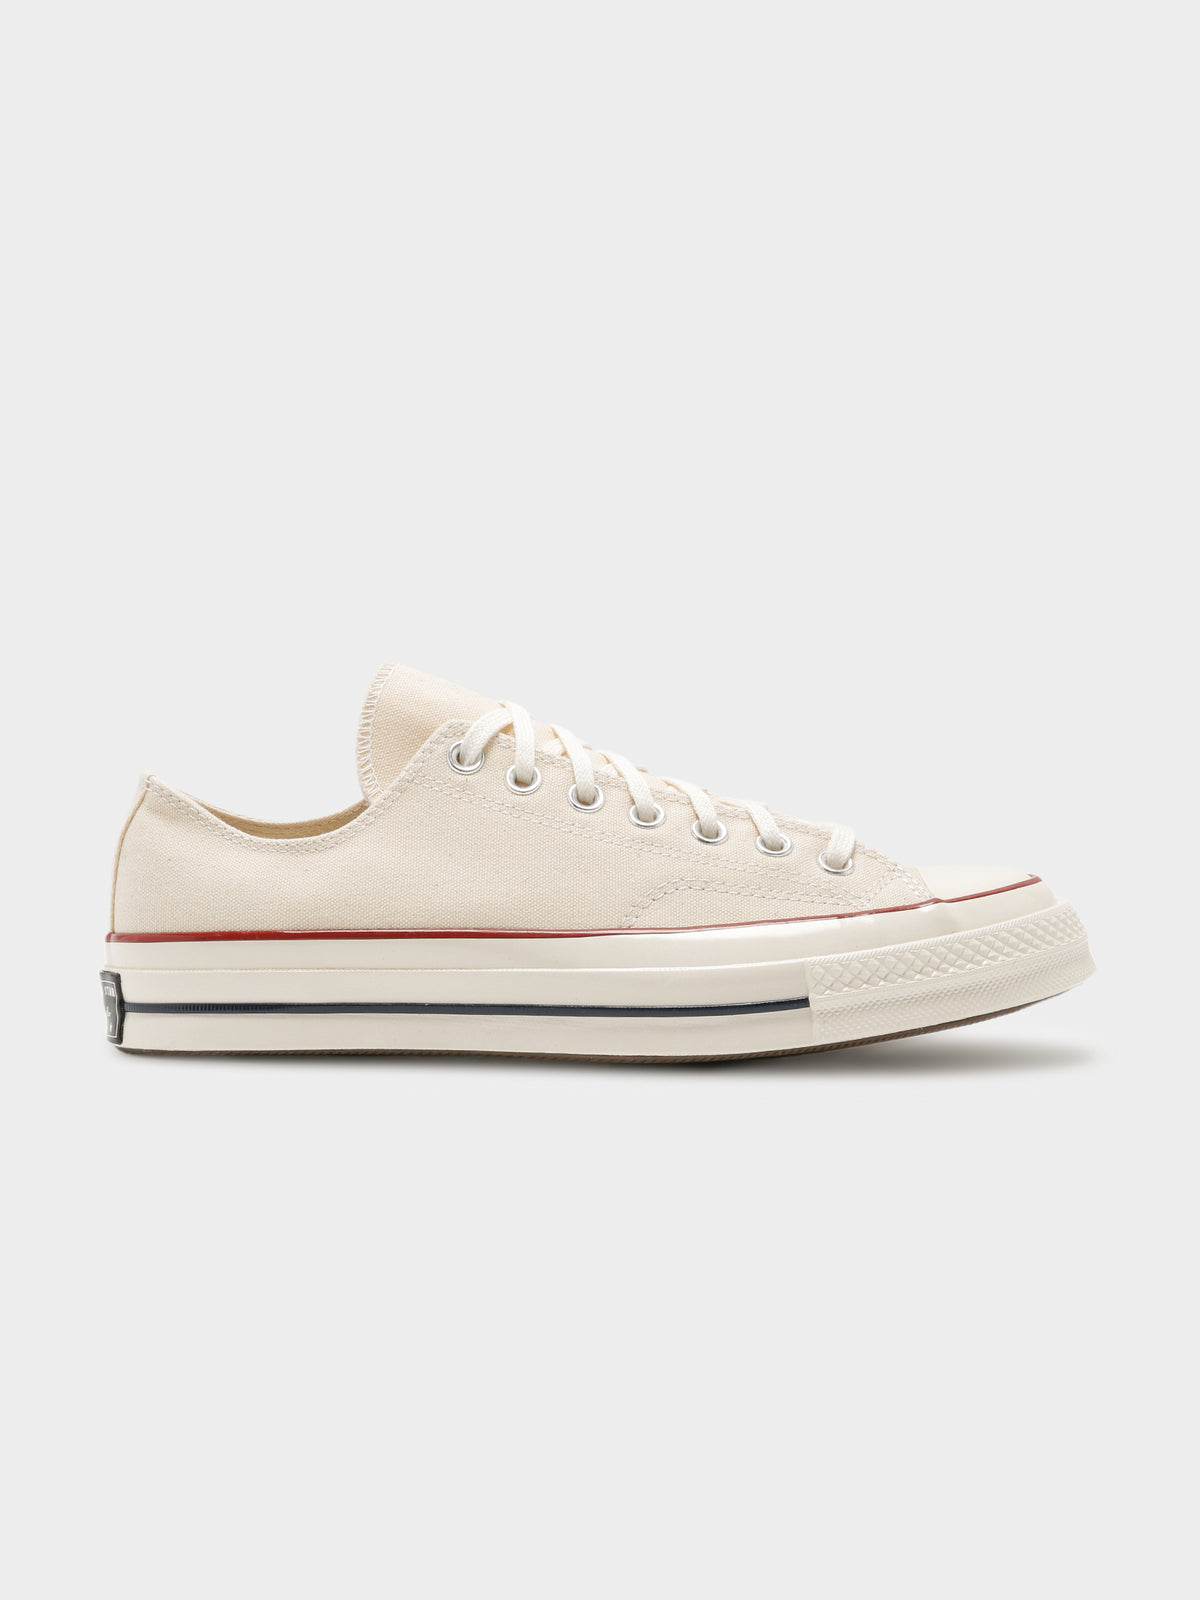 Unisex Chuck Taylor 70 Parchment Low Top Sneakers in White - Glue Store